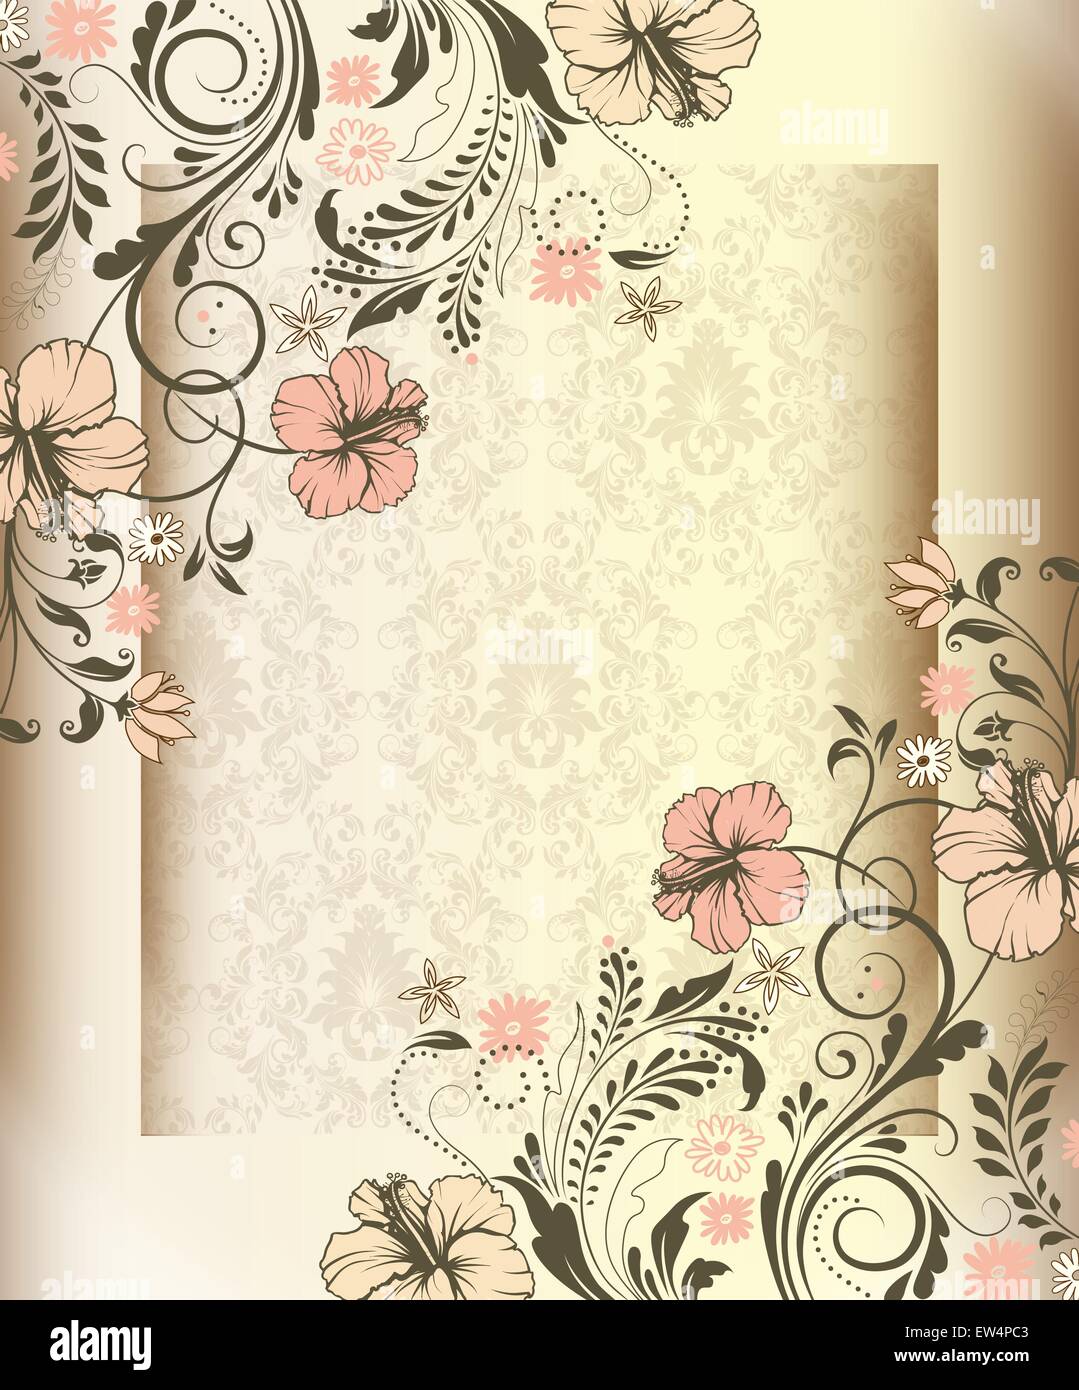 Vintage Invitation Card With Ornate Elegant Retro Abstract Floral Stock Vector Image Art Alamy